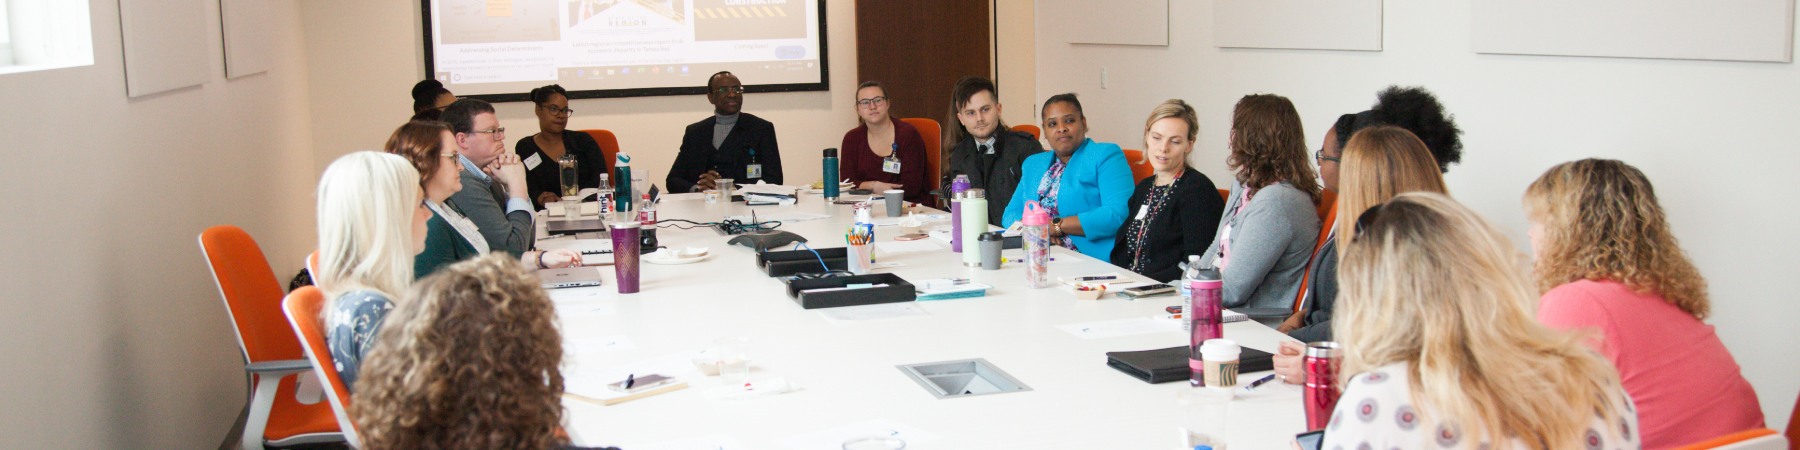 Diverse group of professionals collaborating at a large conference table.